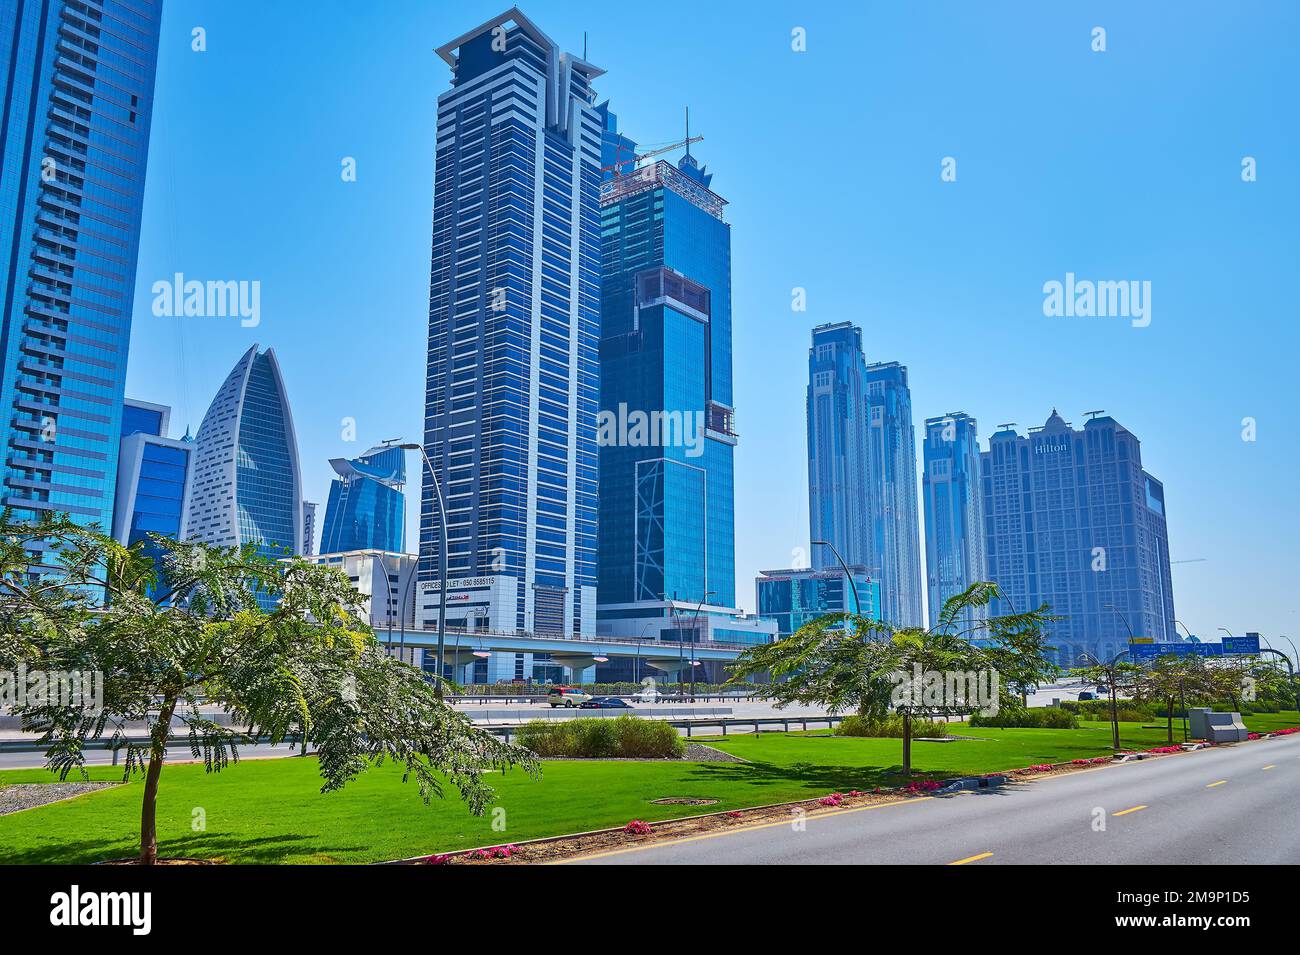 DUBAI, UAE - MARCH 6, 2020: Business Bay district with modern towers, Sheikh Zayed Road and lush green garden beds, on March 6 in Dubai Stock Photo